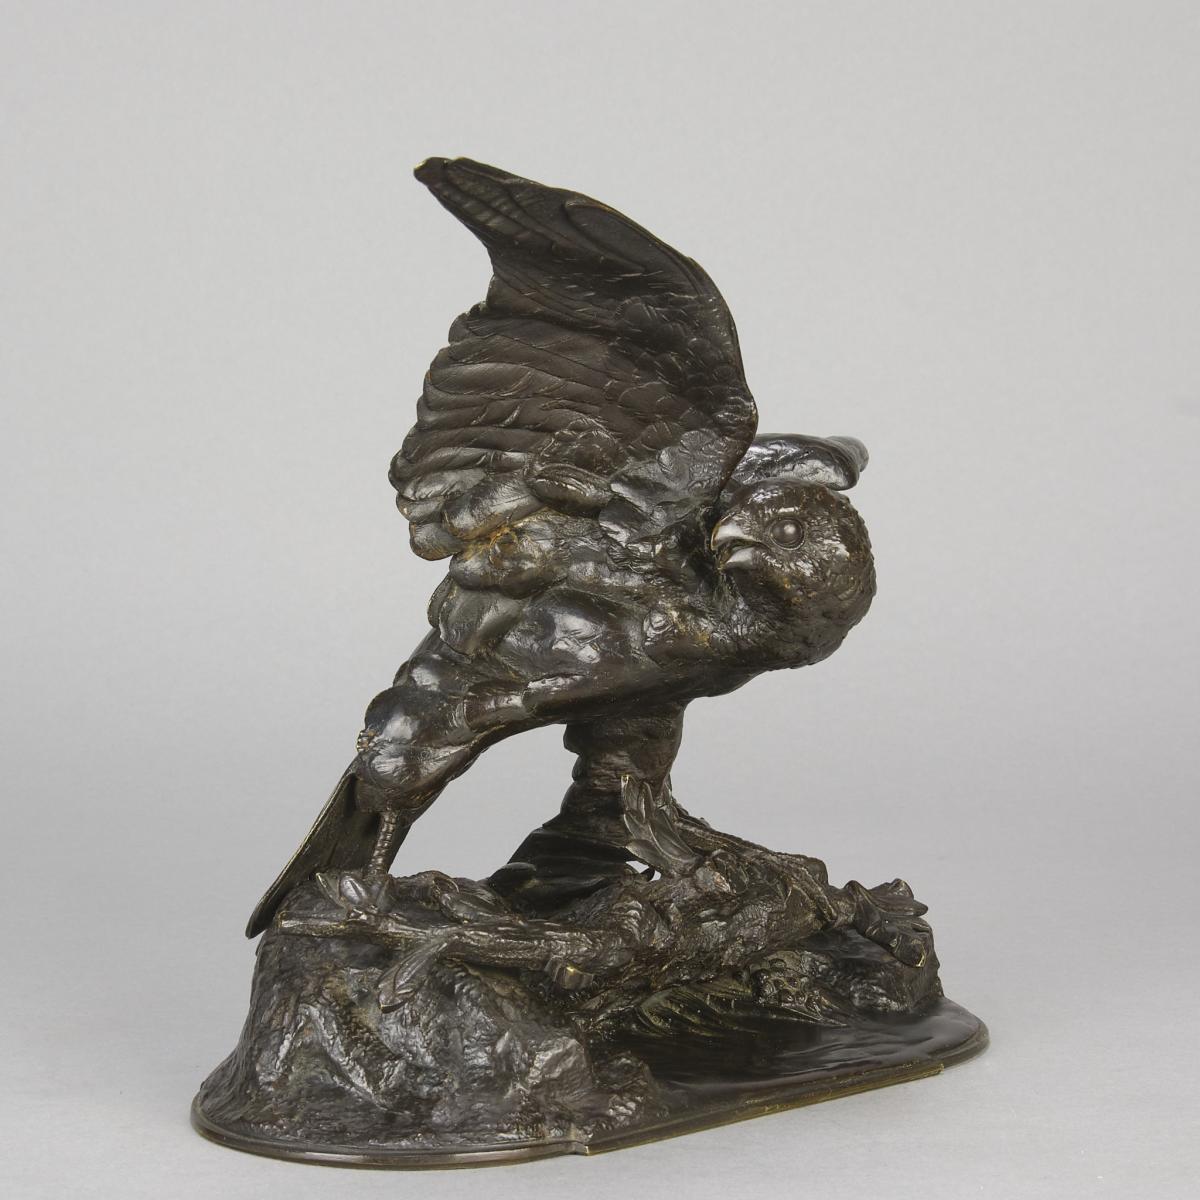 19th Century Animalier Bronze Sculpture entitled "Falcon" by Jules Moigniez